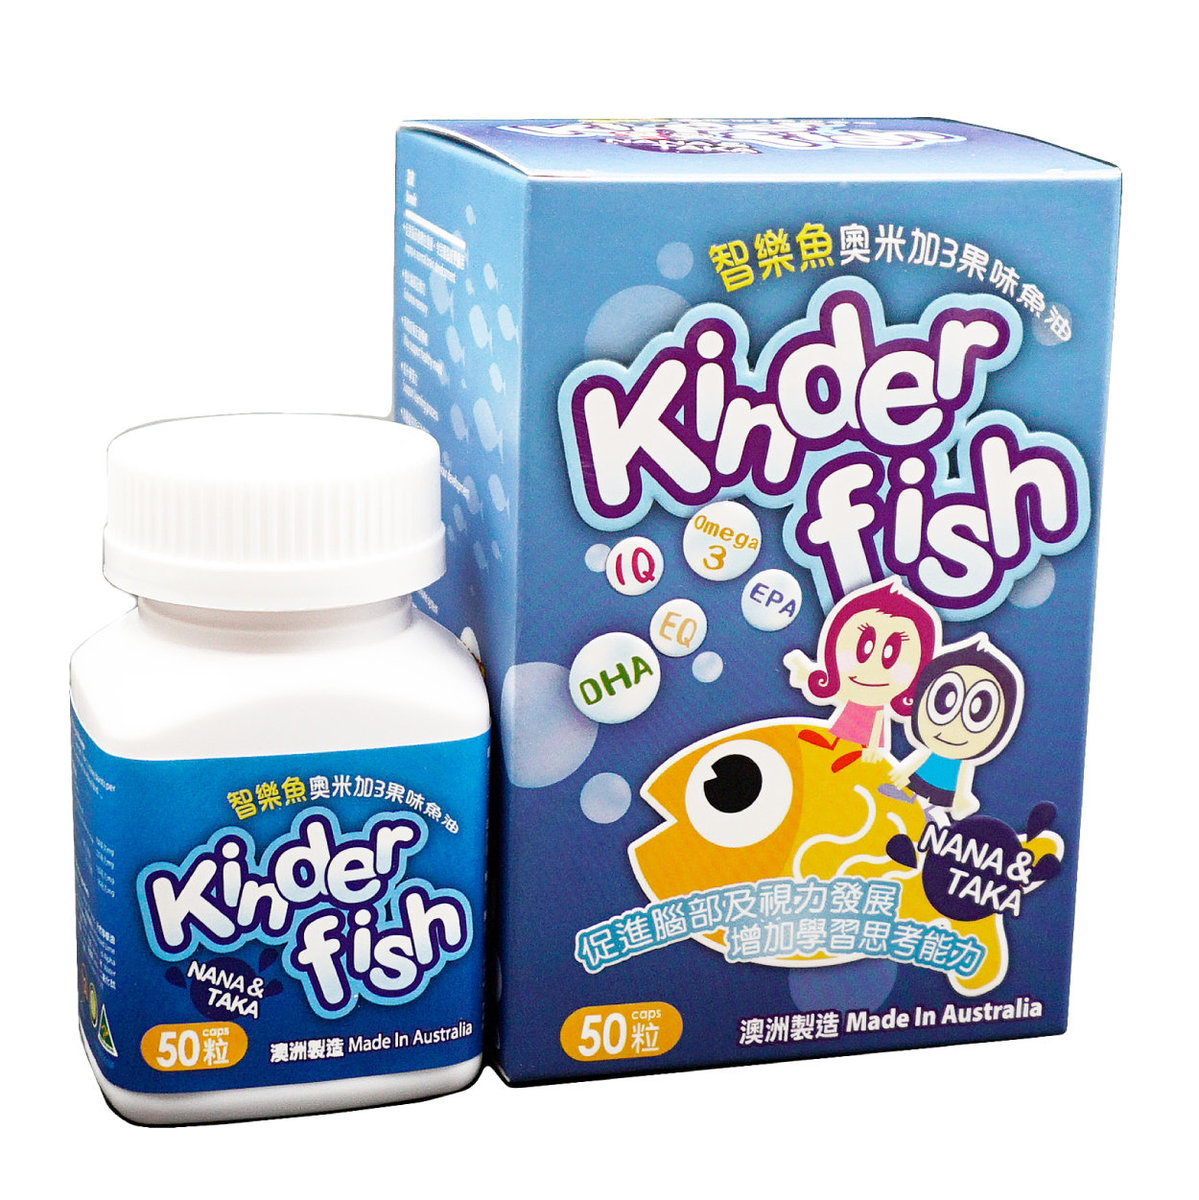 Kinder Fish 50's 1 Box [Expired date: 13/06/2022]